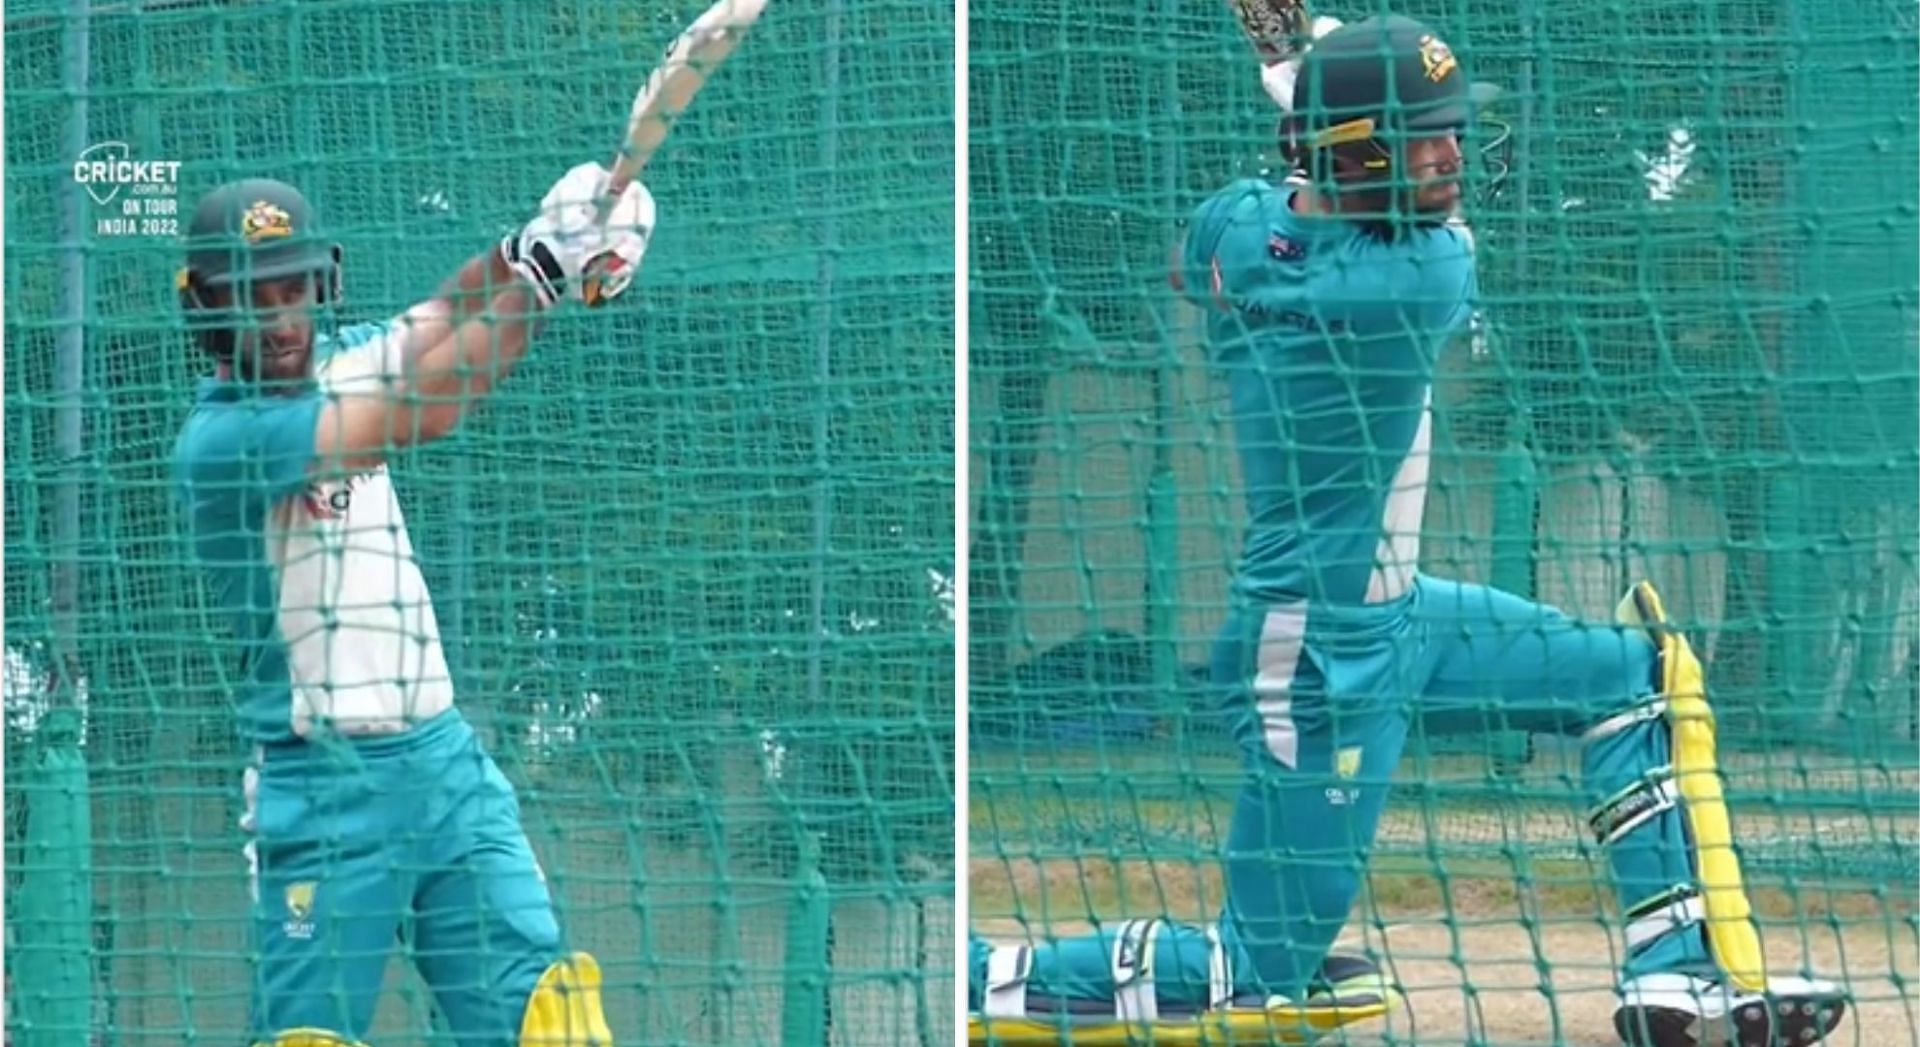 [WATCH] “Can’t wait”: Glenn Maxwell smashes huge sixes in the nets ahead of IND vs AUS 2022